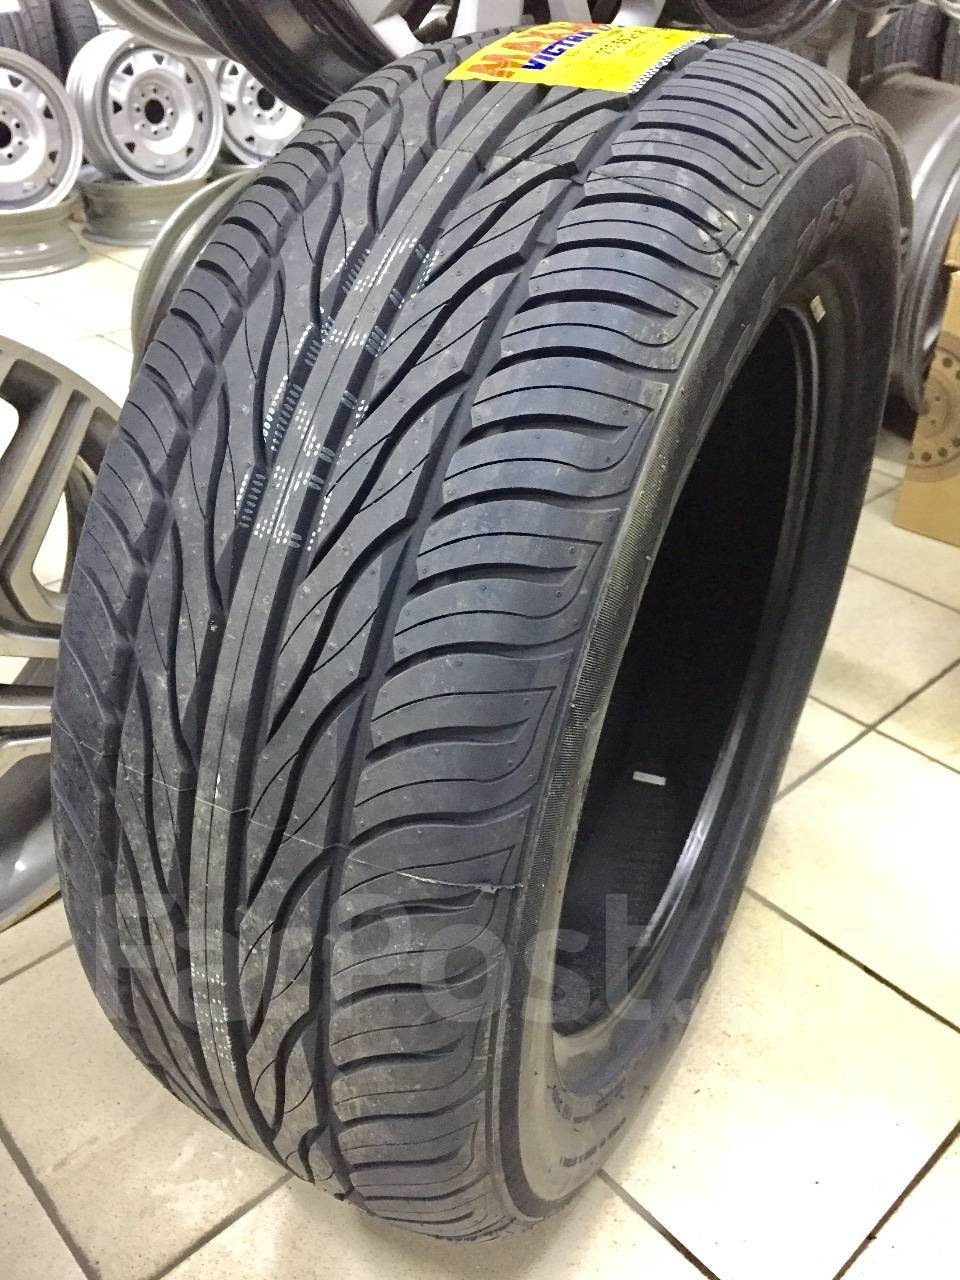 Резина максис лето. Maxxis ma-z4s Victra 285/45 r22 114v. Maxxis ma-z4s Victra. Шины Maxxis Victra z4s. Maxxis ma-z4s Victra (XL).